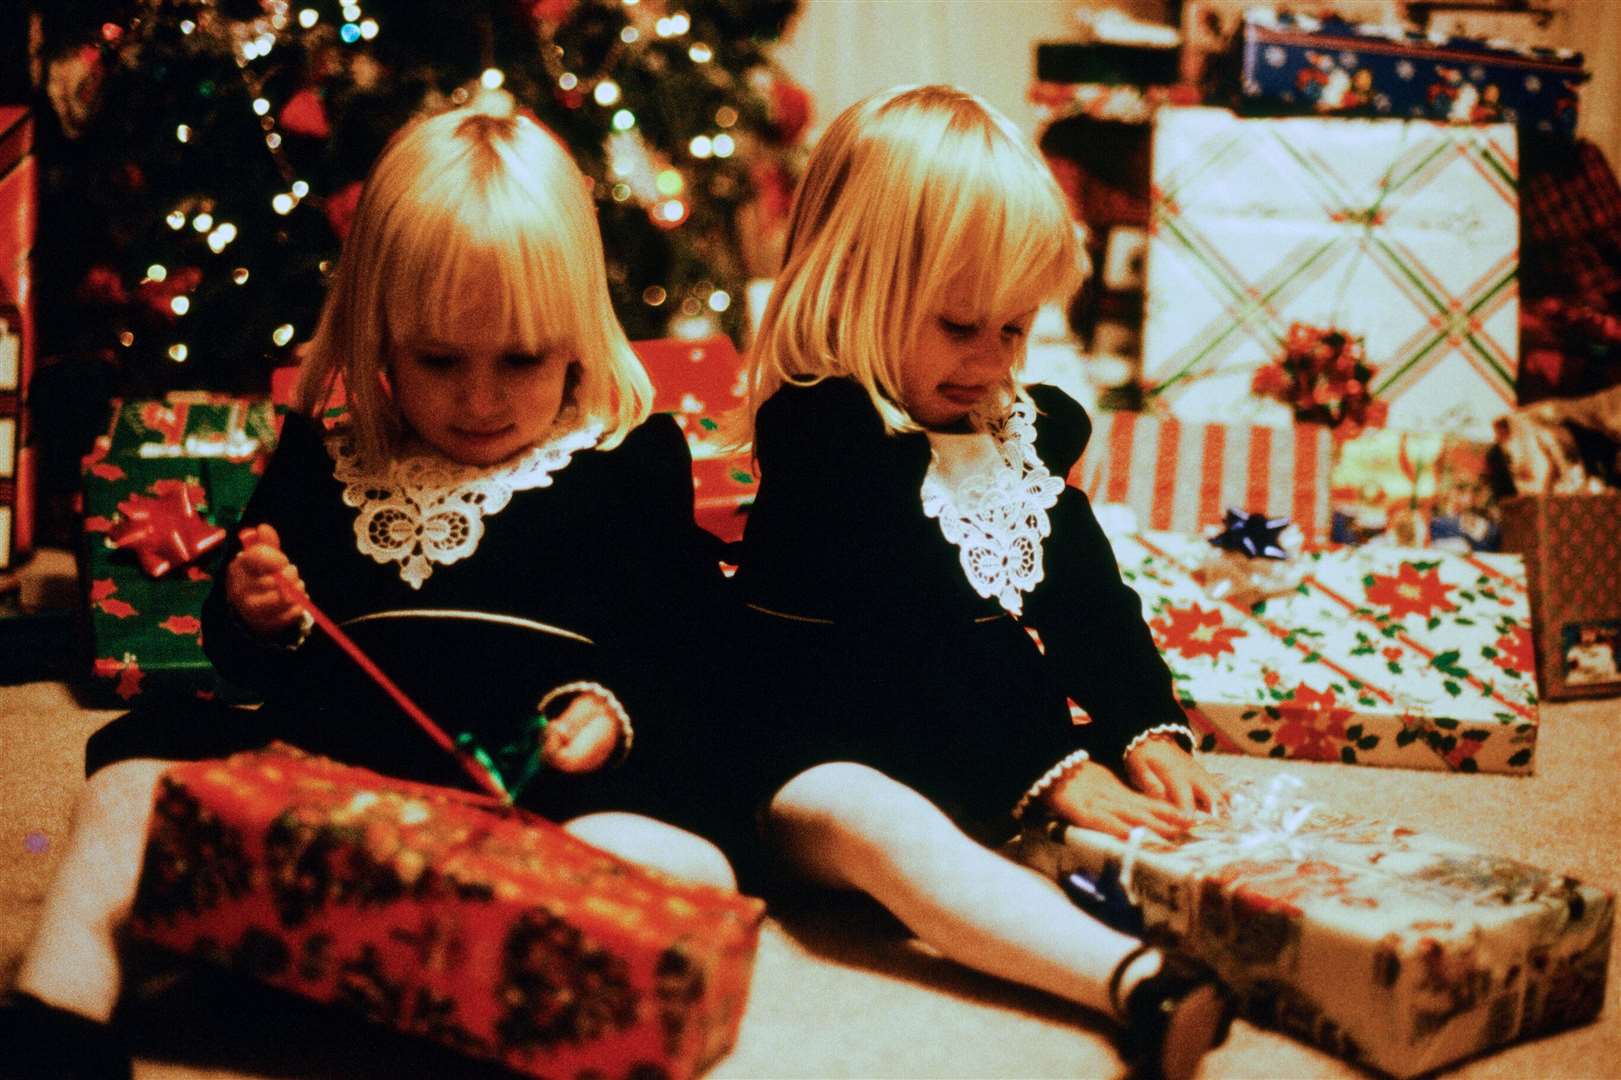 Are vitual gift lists taking away the magic of what’s under the tree? Image: iStock.